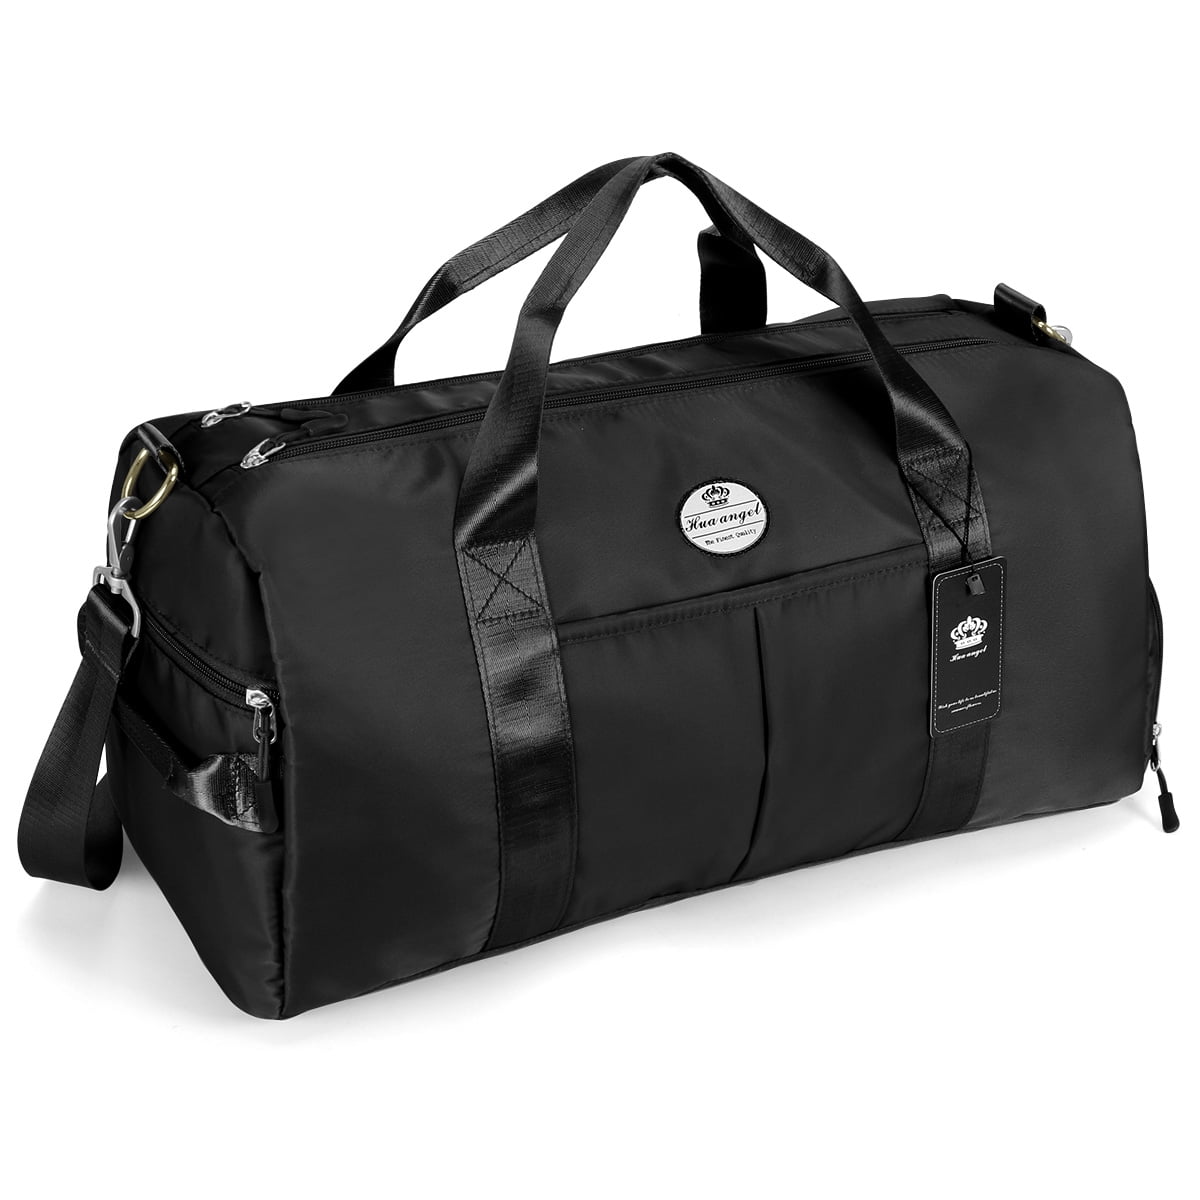 Travel Duffle Bag Sports Gym Bag with Shoes Compartment and Wet Pocket 